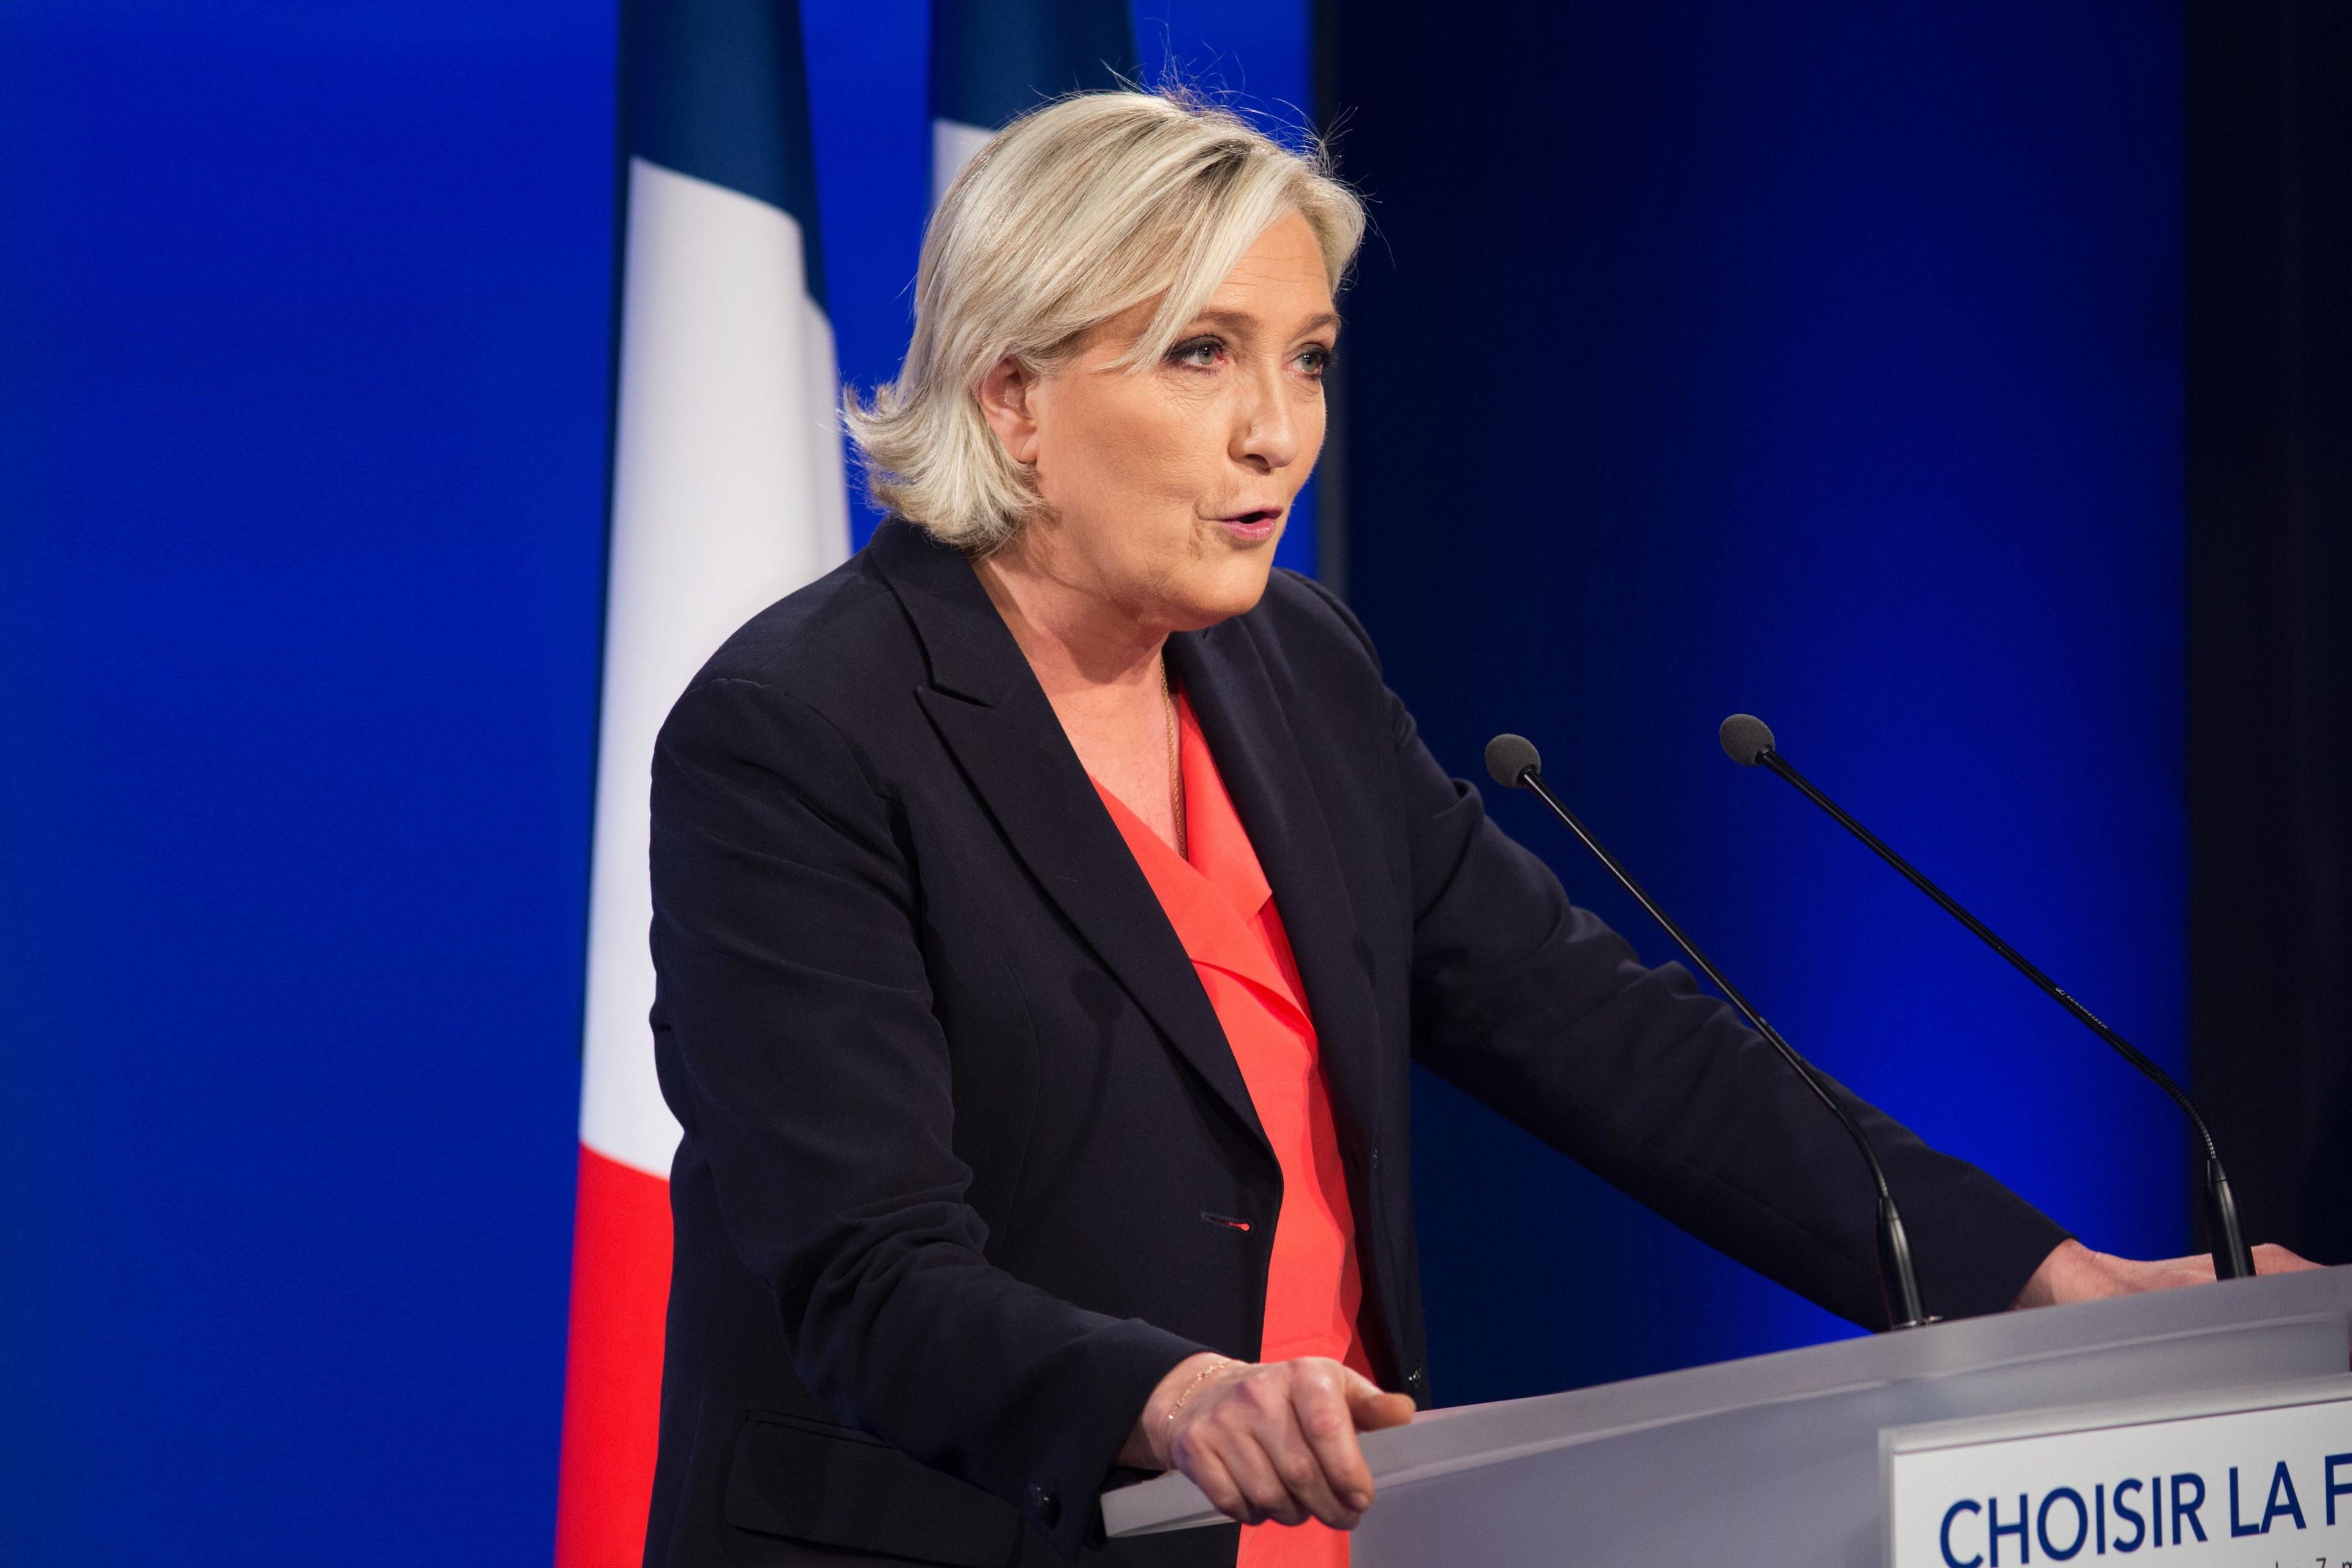 Over 180 candidates withdraw from French elections to combat Le Pen's party